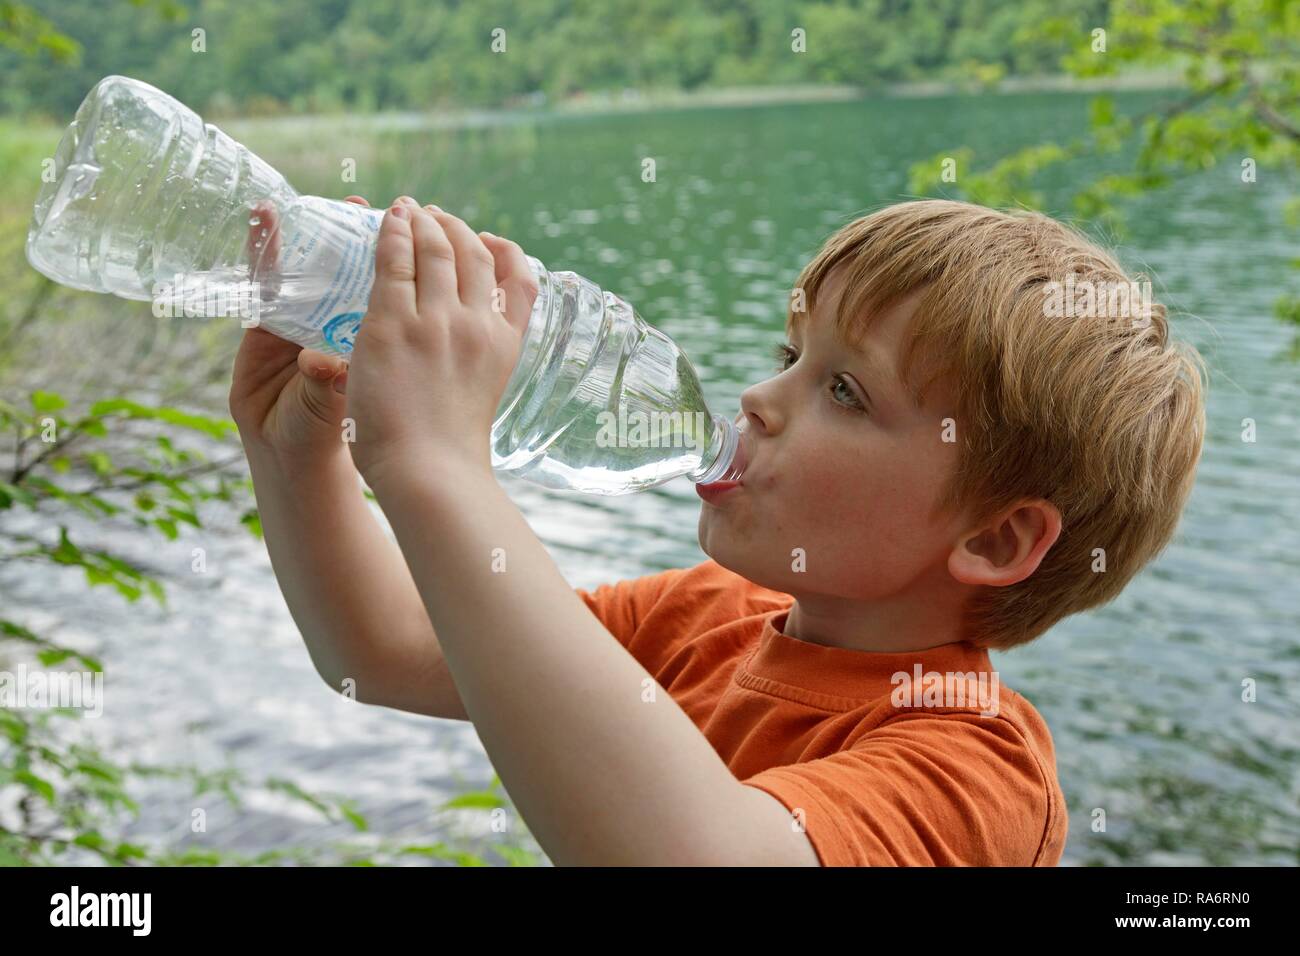 Boy drinks water from a plastic bottle, Plitvice Lakes National Park, Croatia Stock Photo